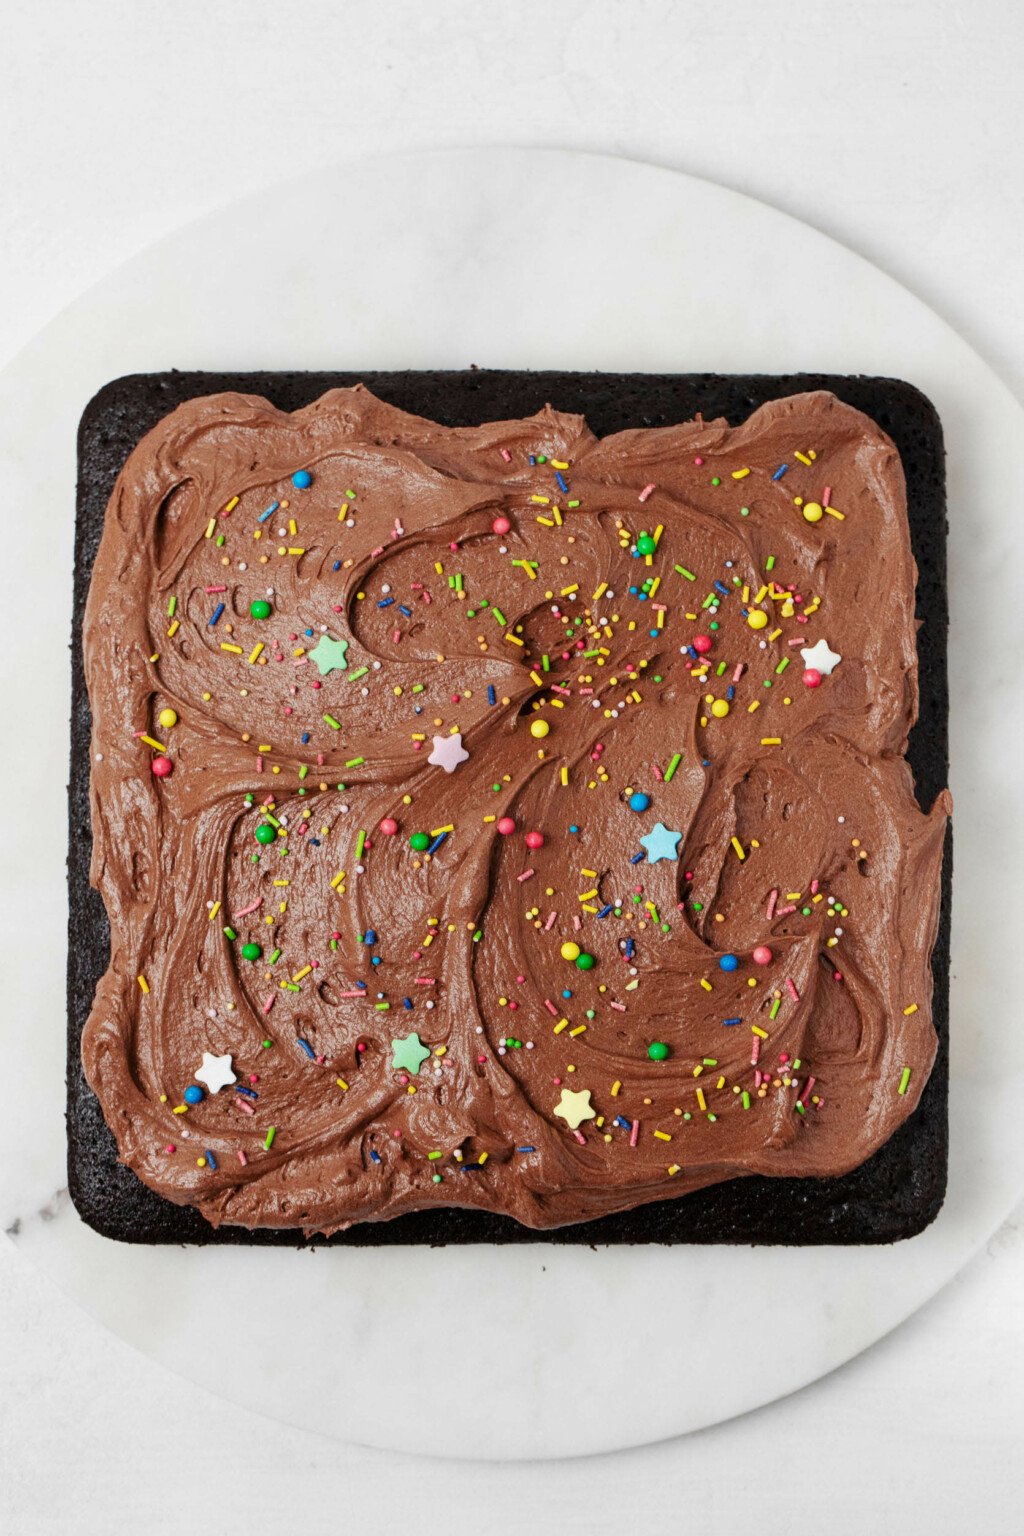 A square vegan chocolate snack cake decorated with buttercream frosting and sprinkles.  It is resting on a white surface.